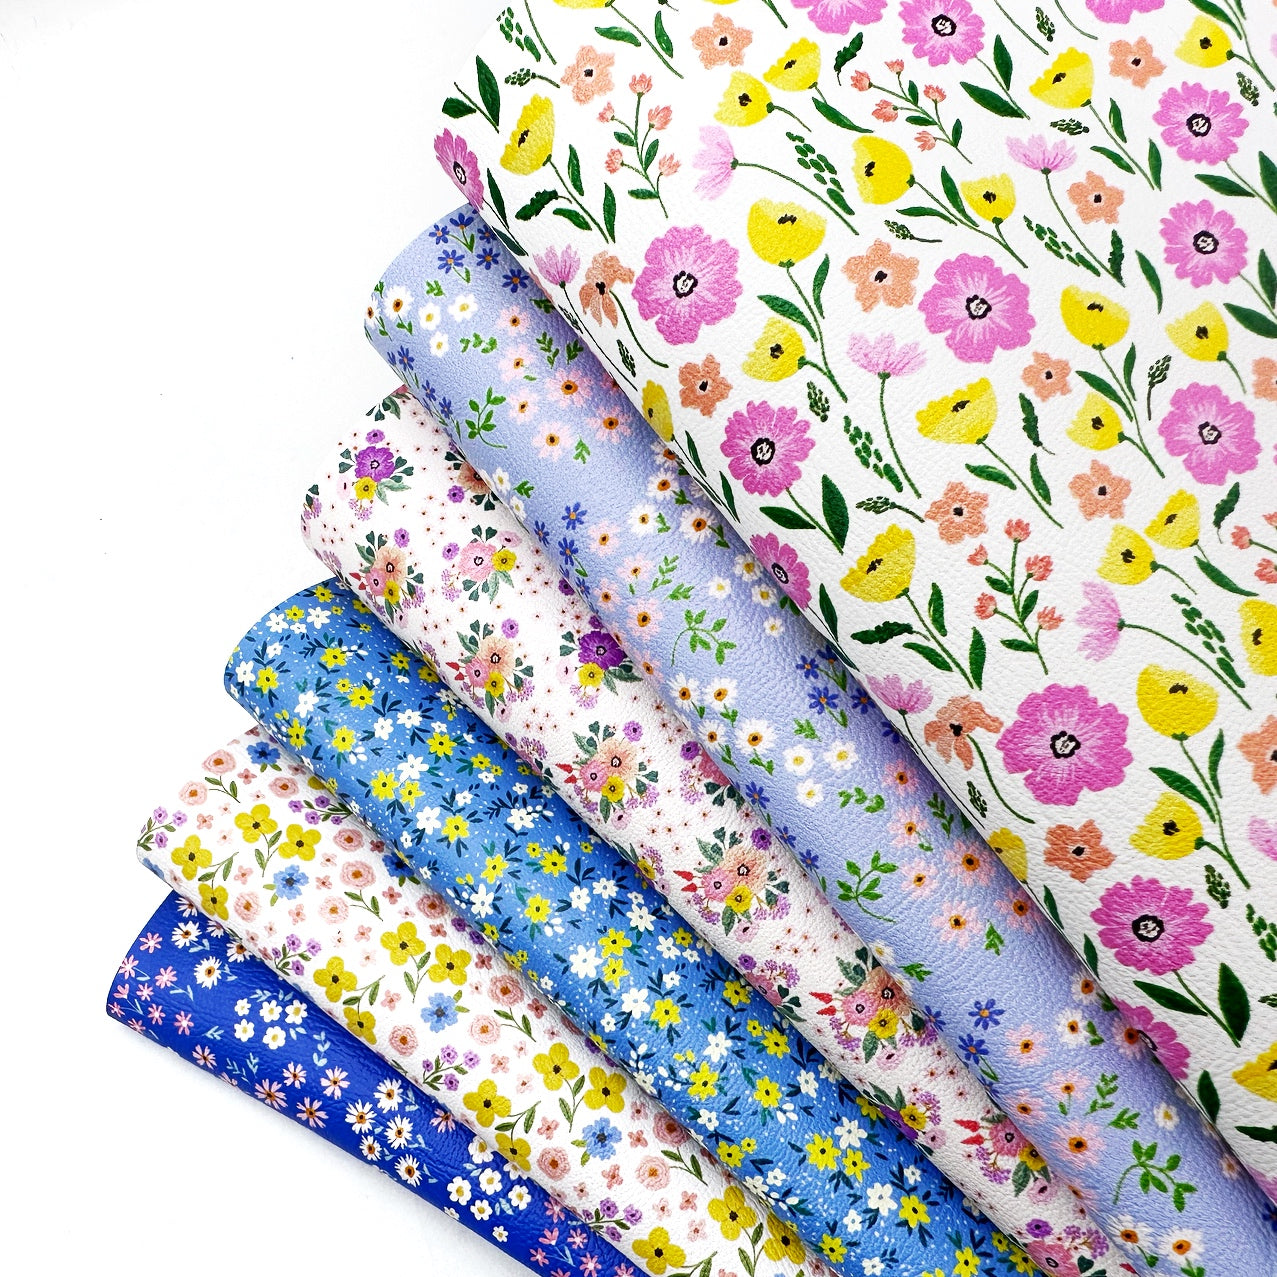 Summer Brights Floral Featured Fabric Pack